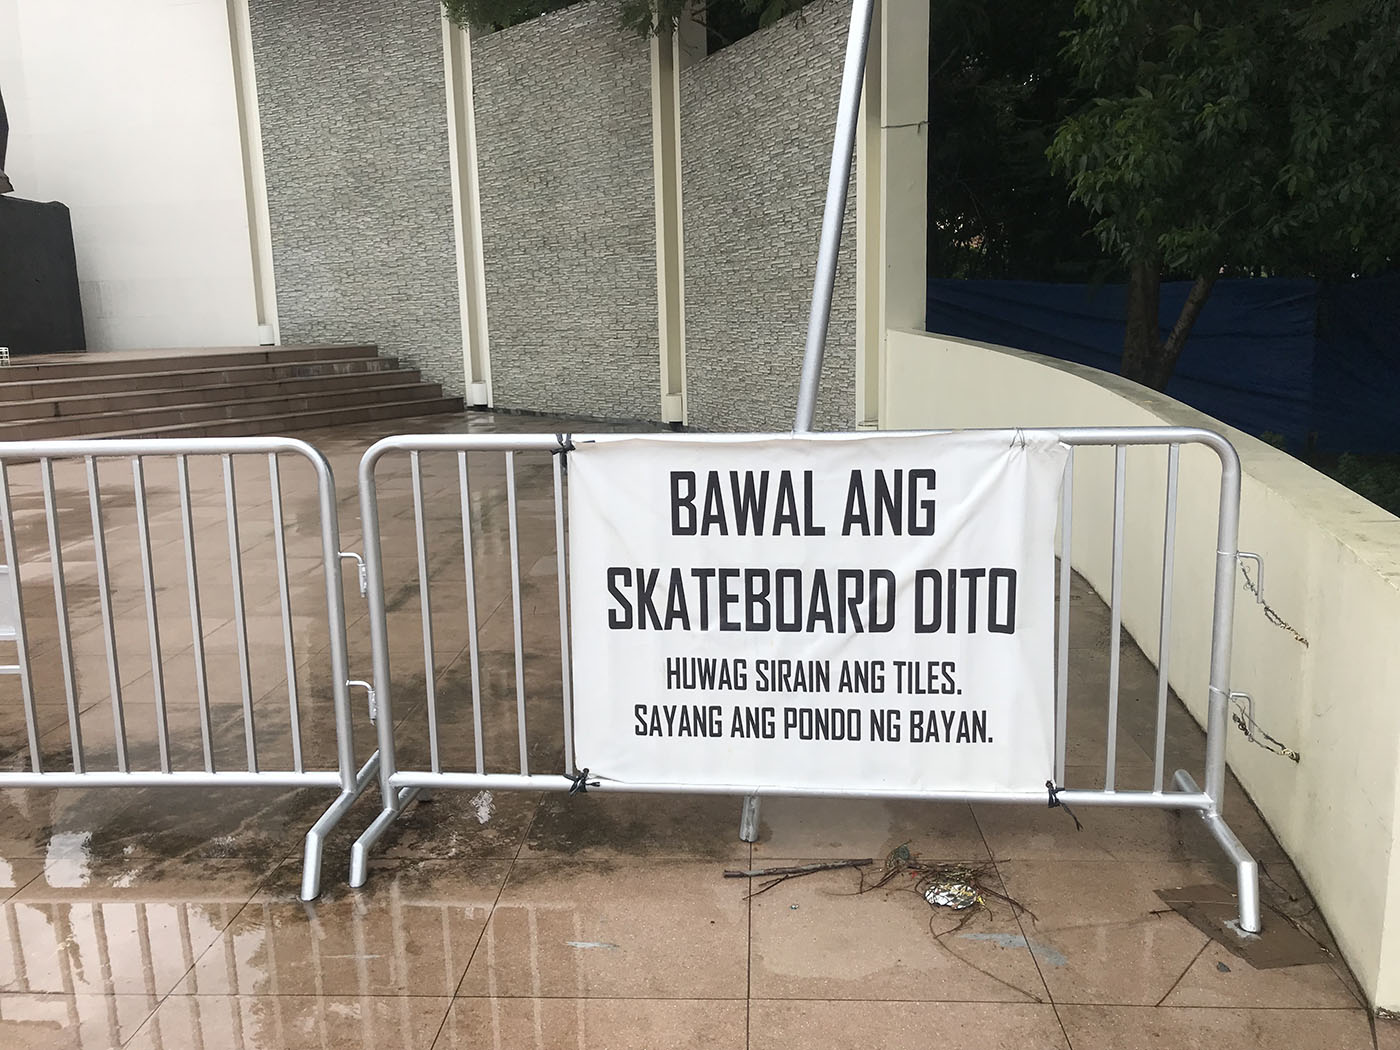 Most days, the NHCP puts up barriers and this sign a few meters away from Castrillo's monument. They say this is to prevent vandalism and to keep people from throwing trash near the statue. 